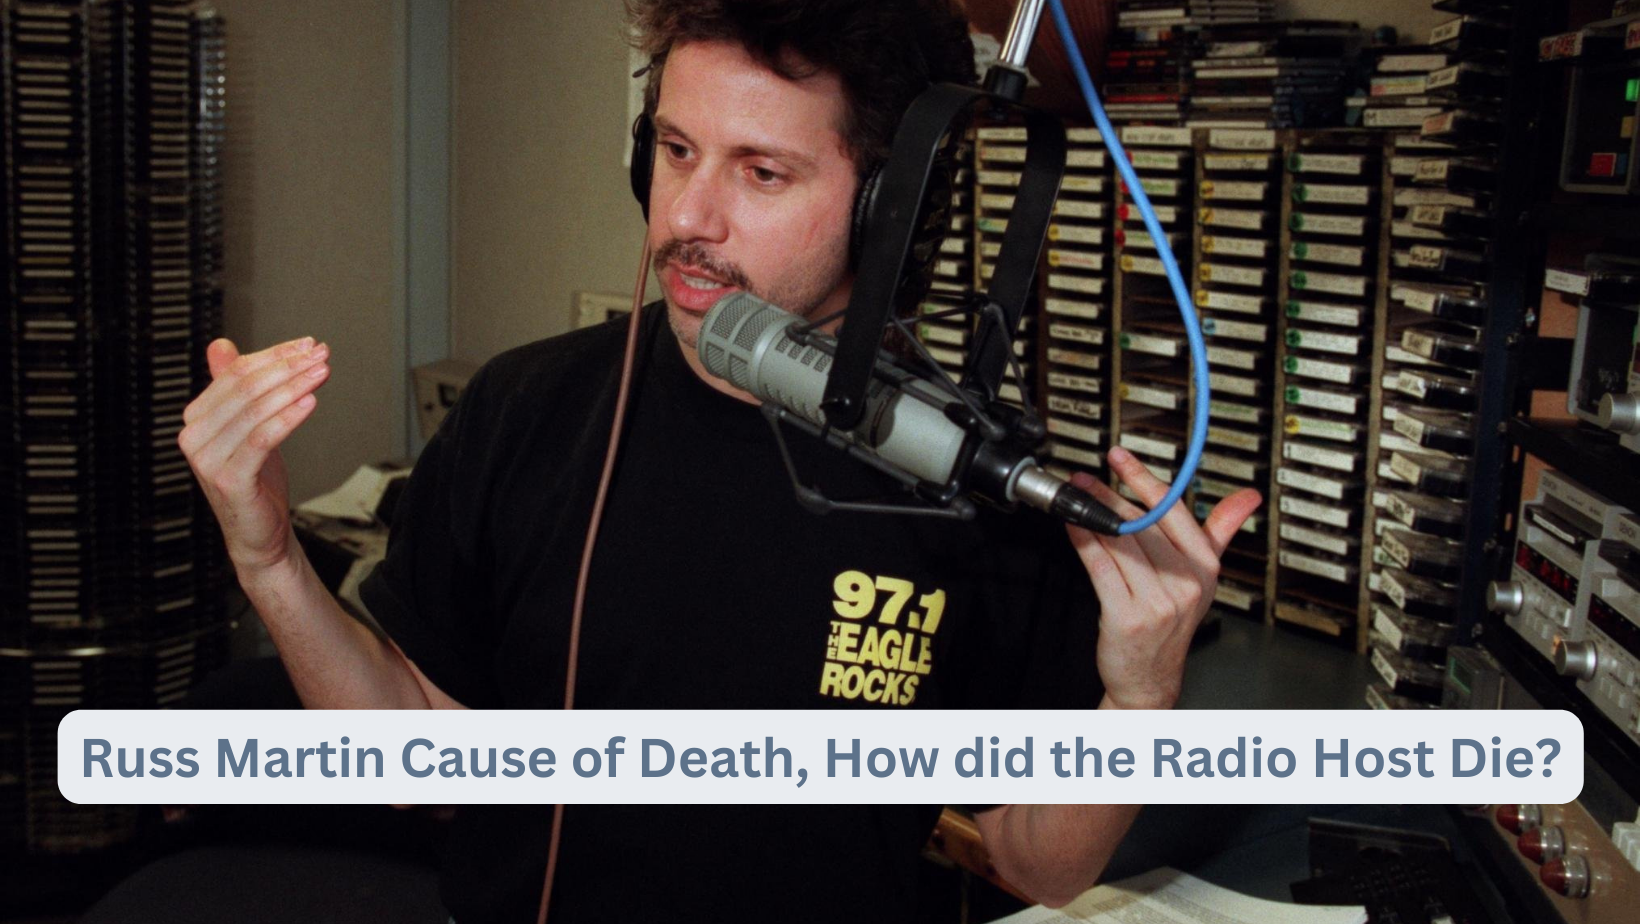 Russ Martin Cause of Death, How did the Radio Host Die?